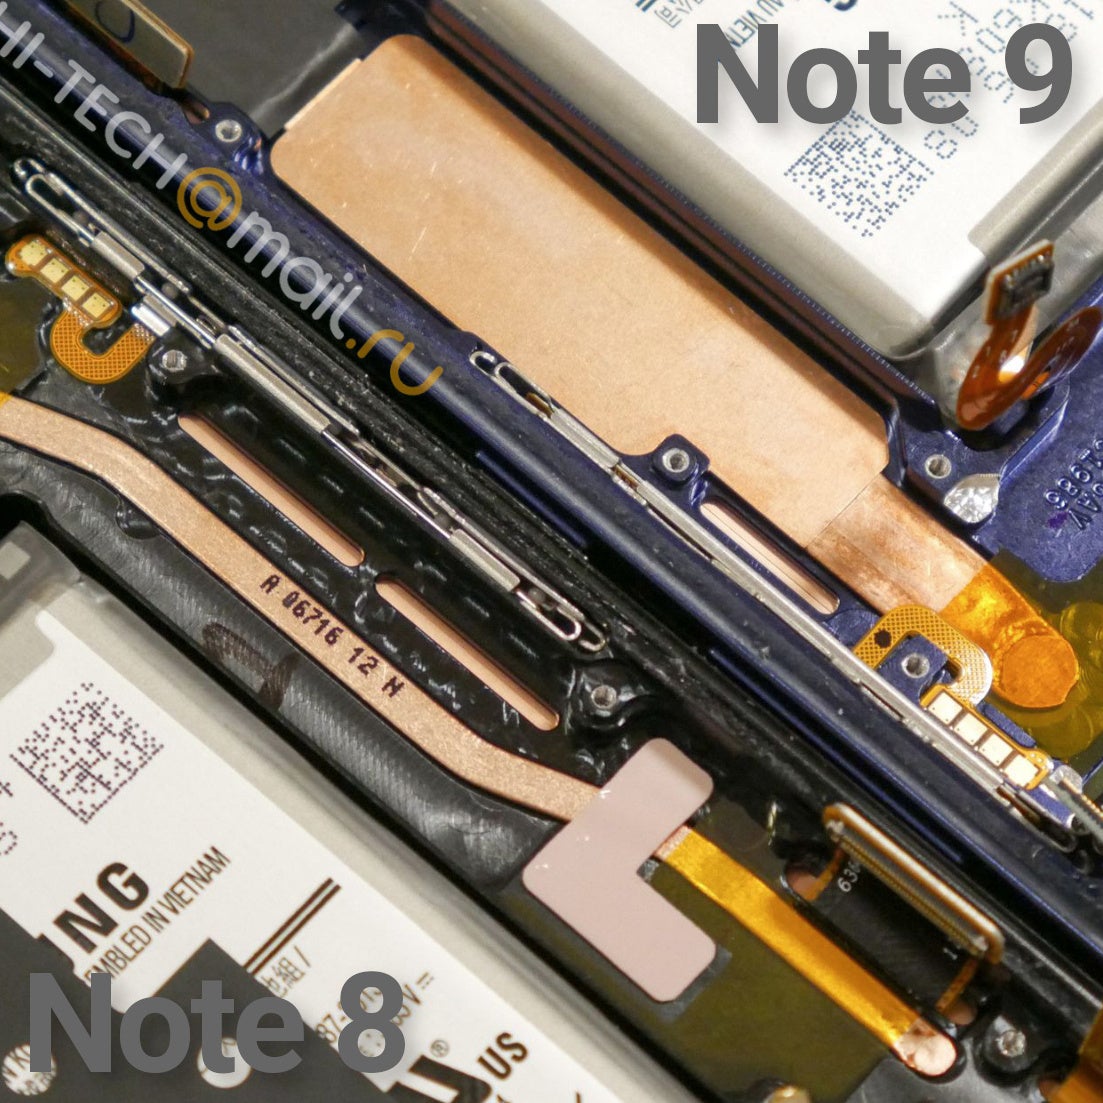 Note 9 vs Note 8 cooling systems, image courtesy of Hi Tech Mail Ru - World-first Samsung Galaxy Note 9 teardown shows huge water cooling system